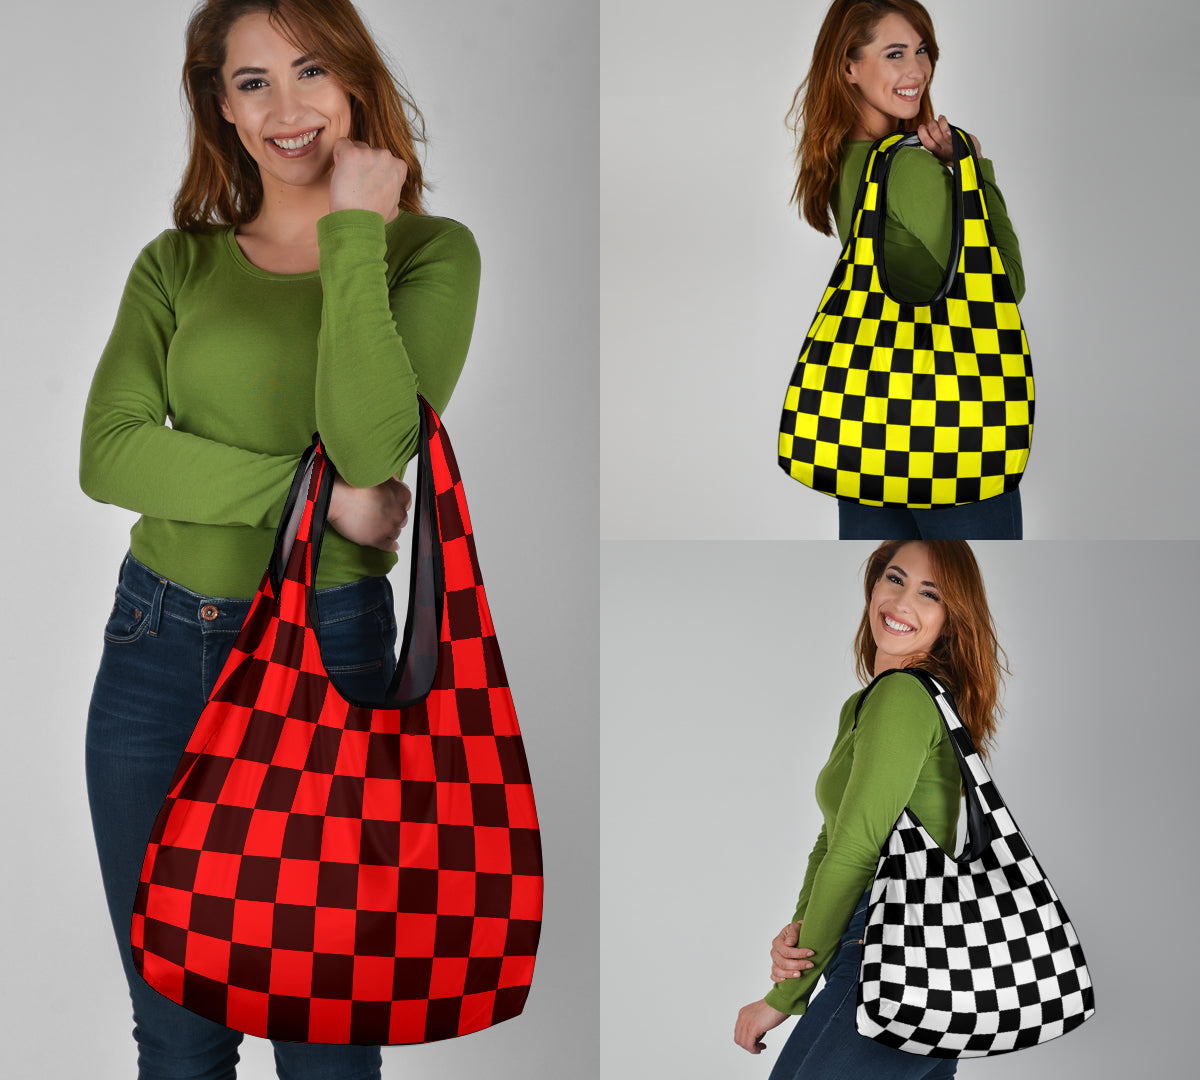 Racing Checkered Grocery Bags